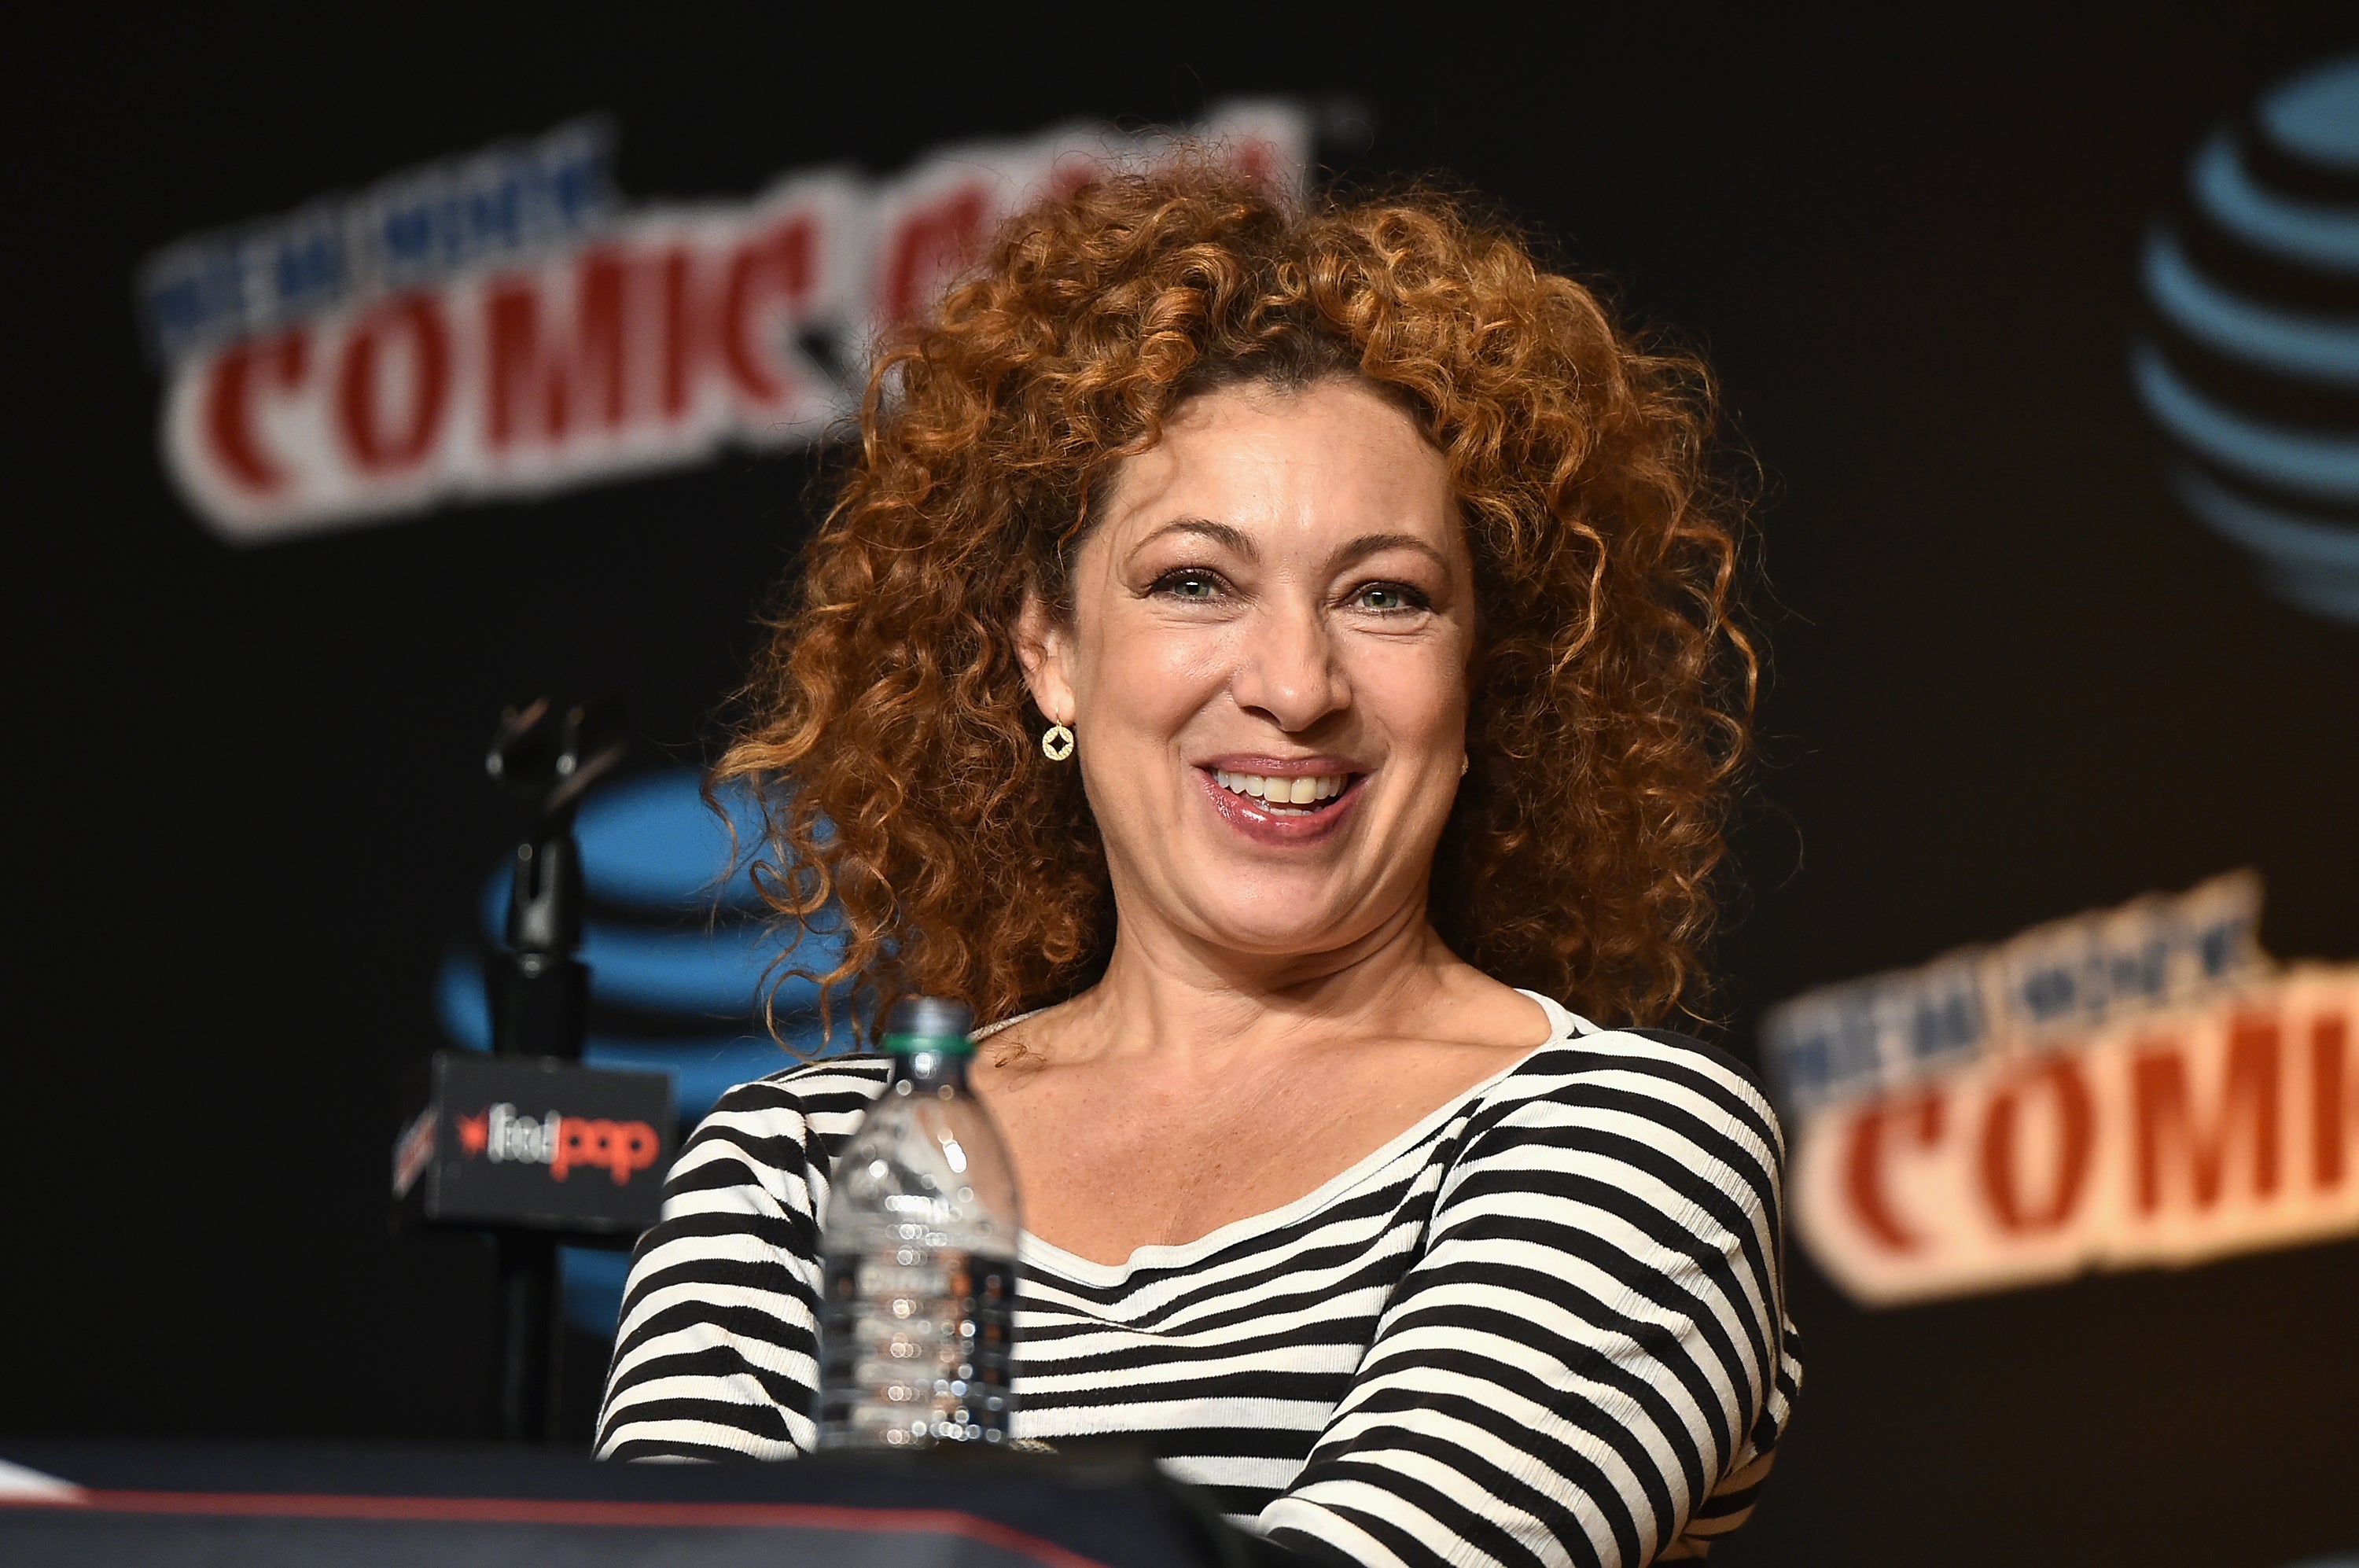 Kingston speaking on a ‘Doctor Who’ panel in 2016